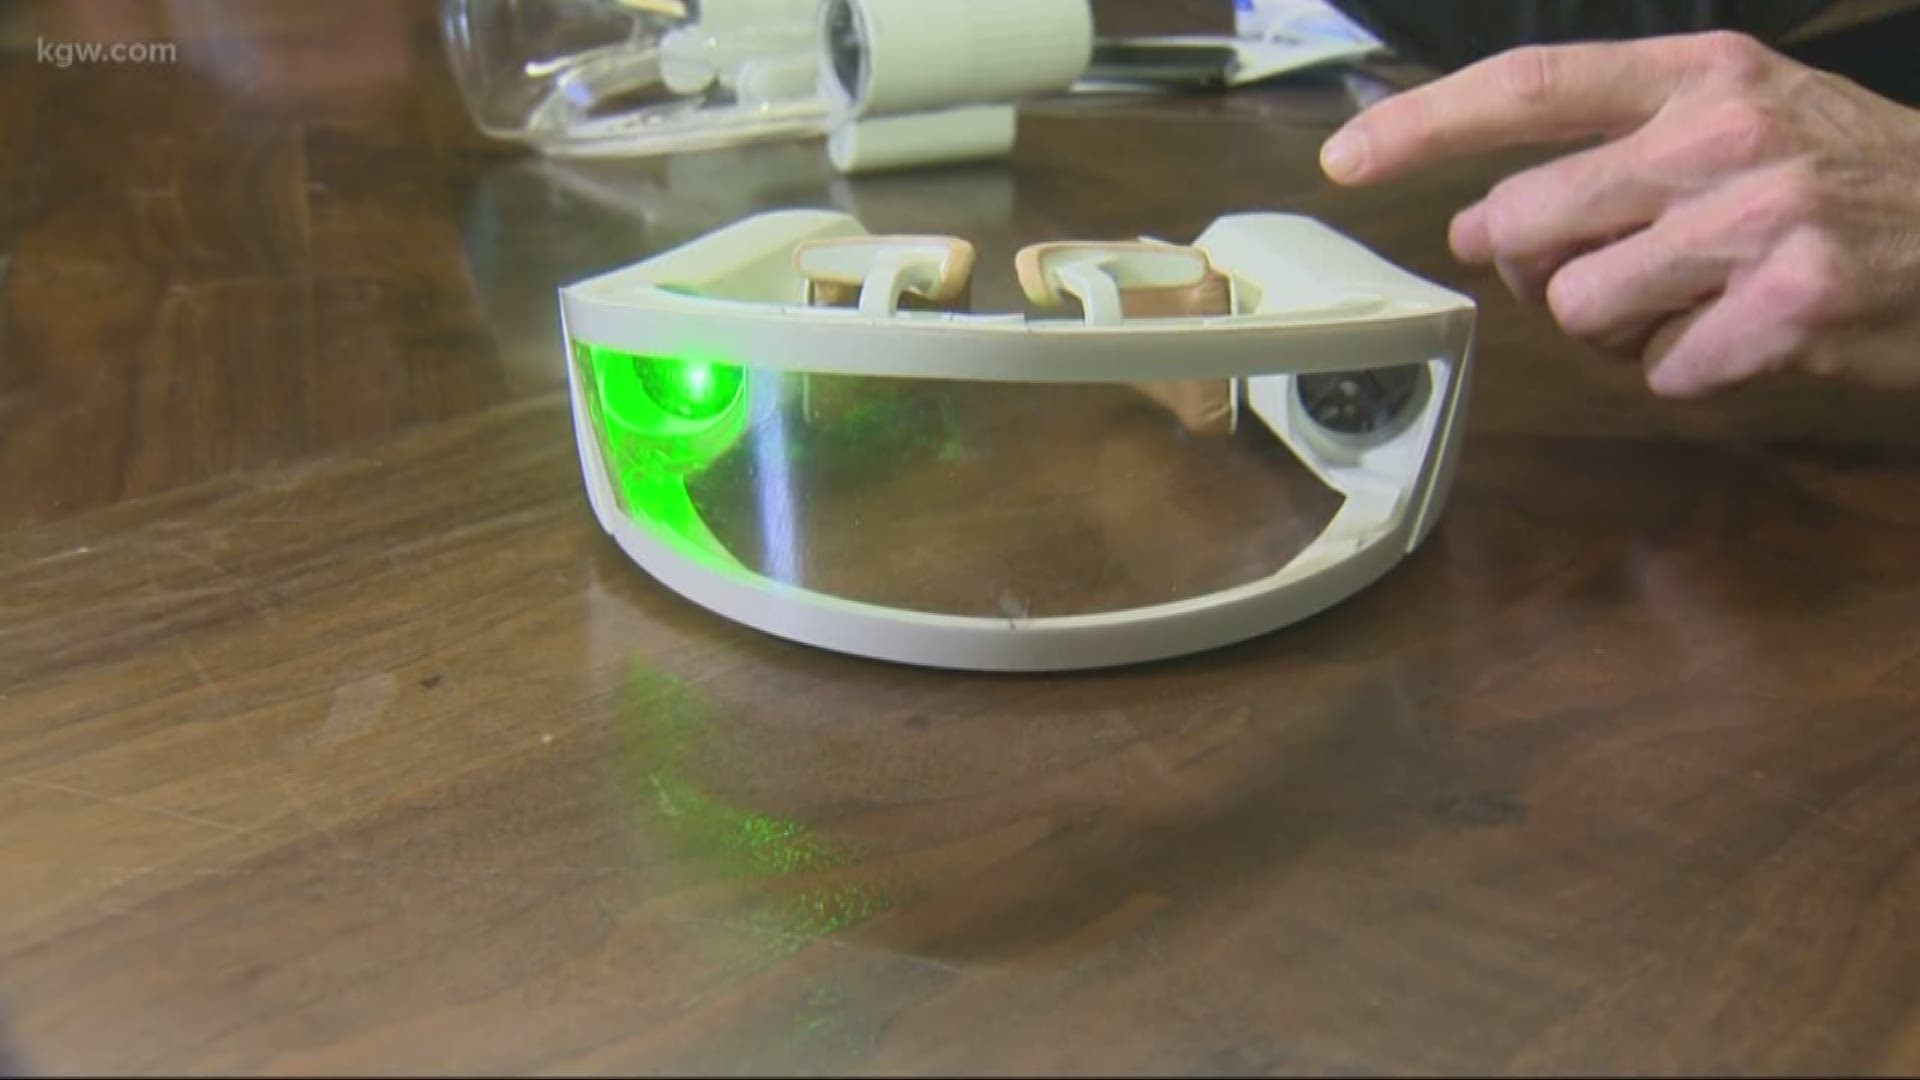 A local startup has developed a new breathing mask. Keely Chalmers explains how it could improve breathing.